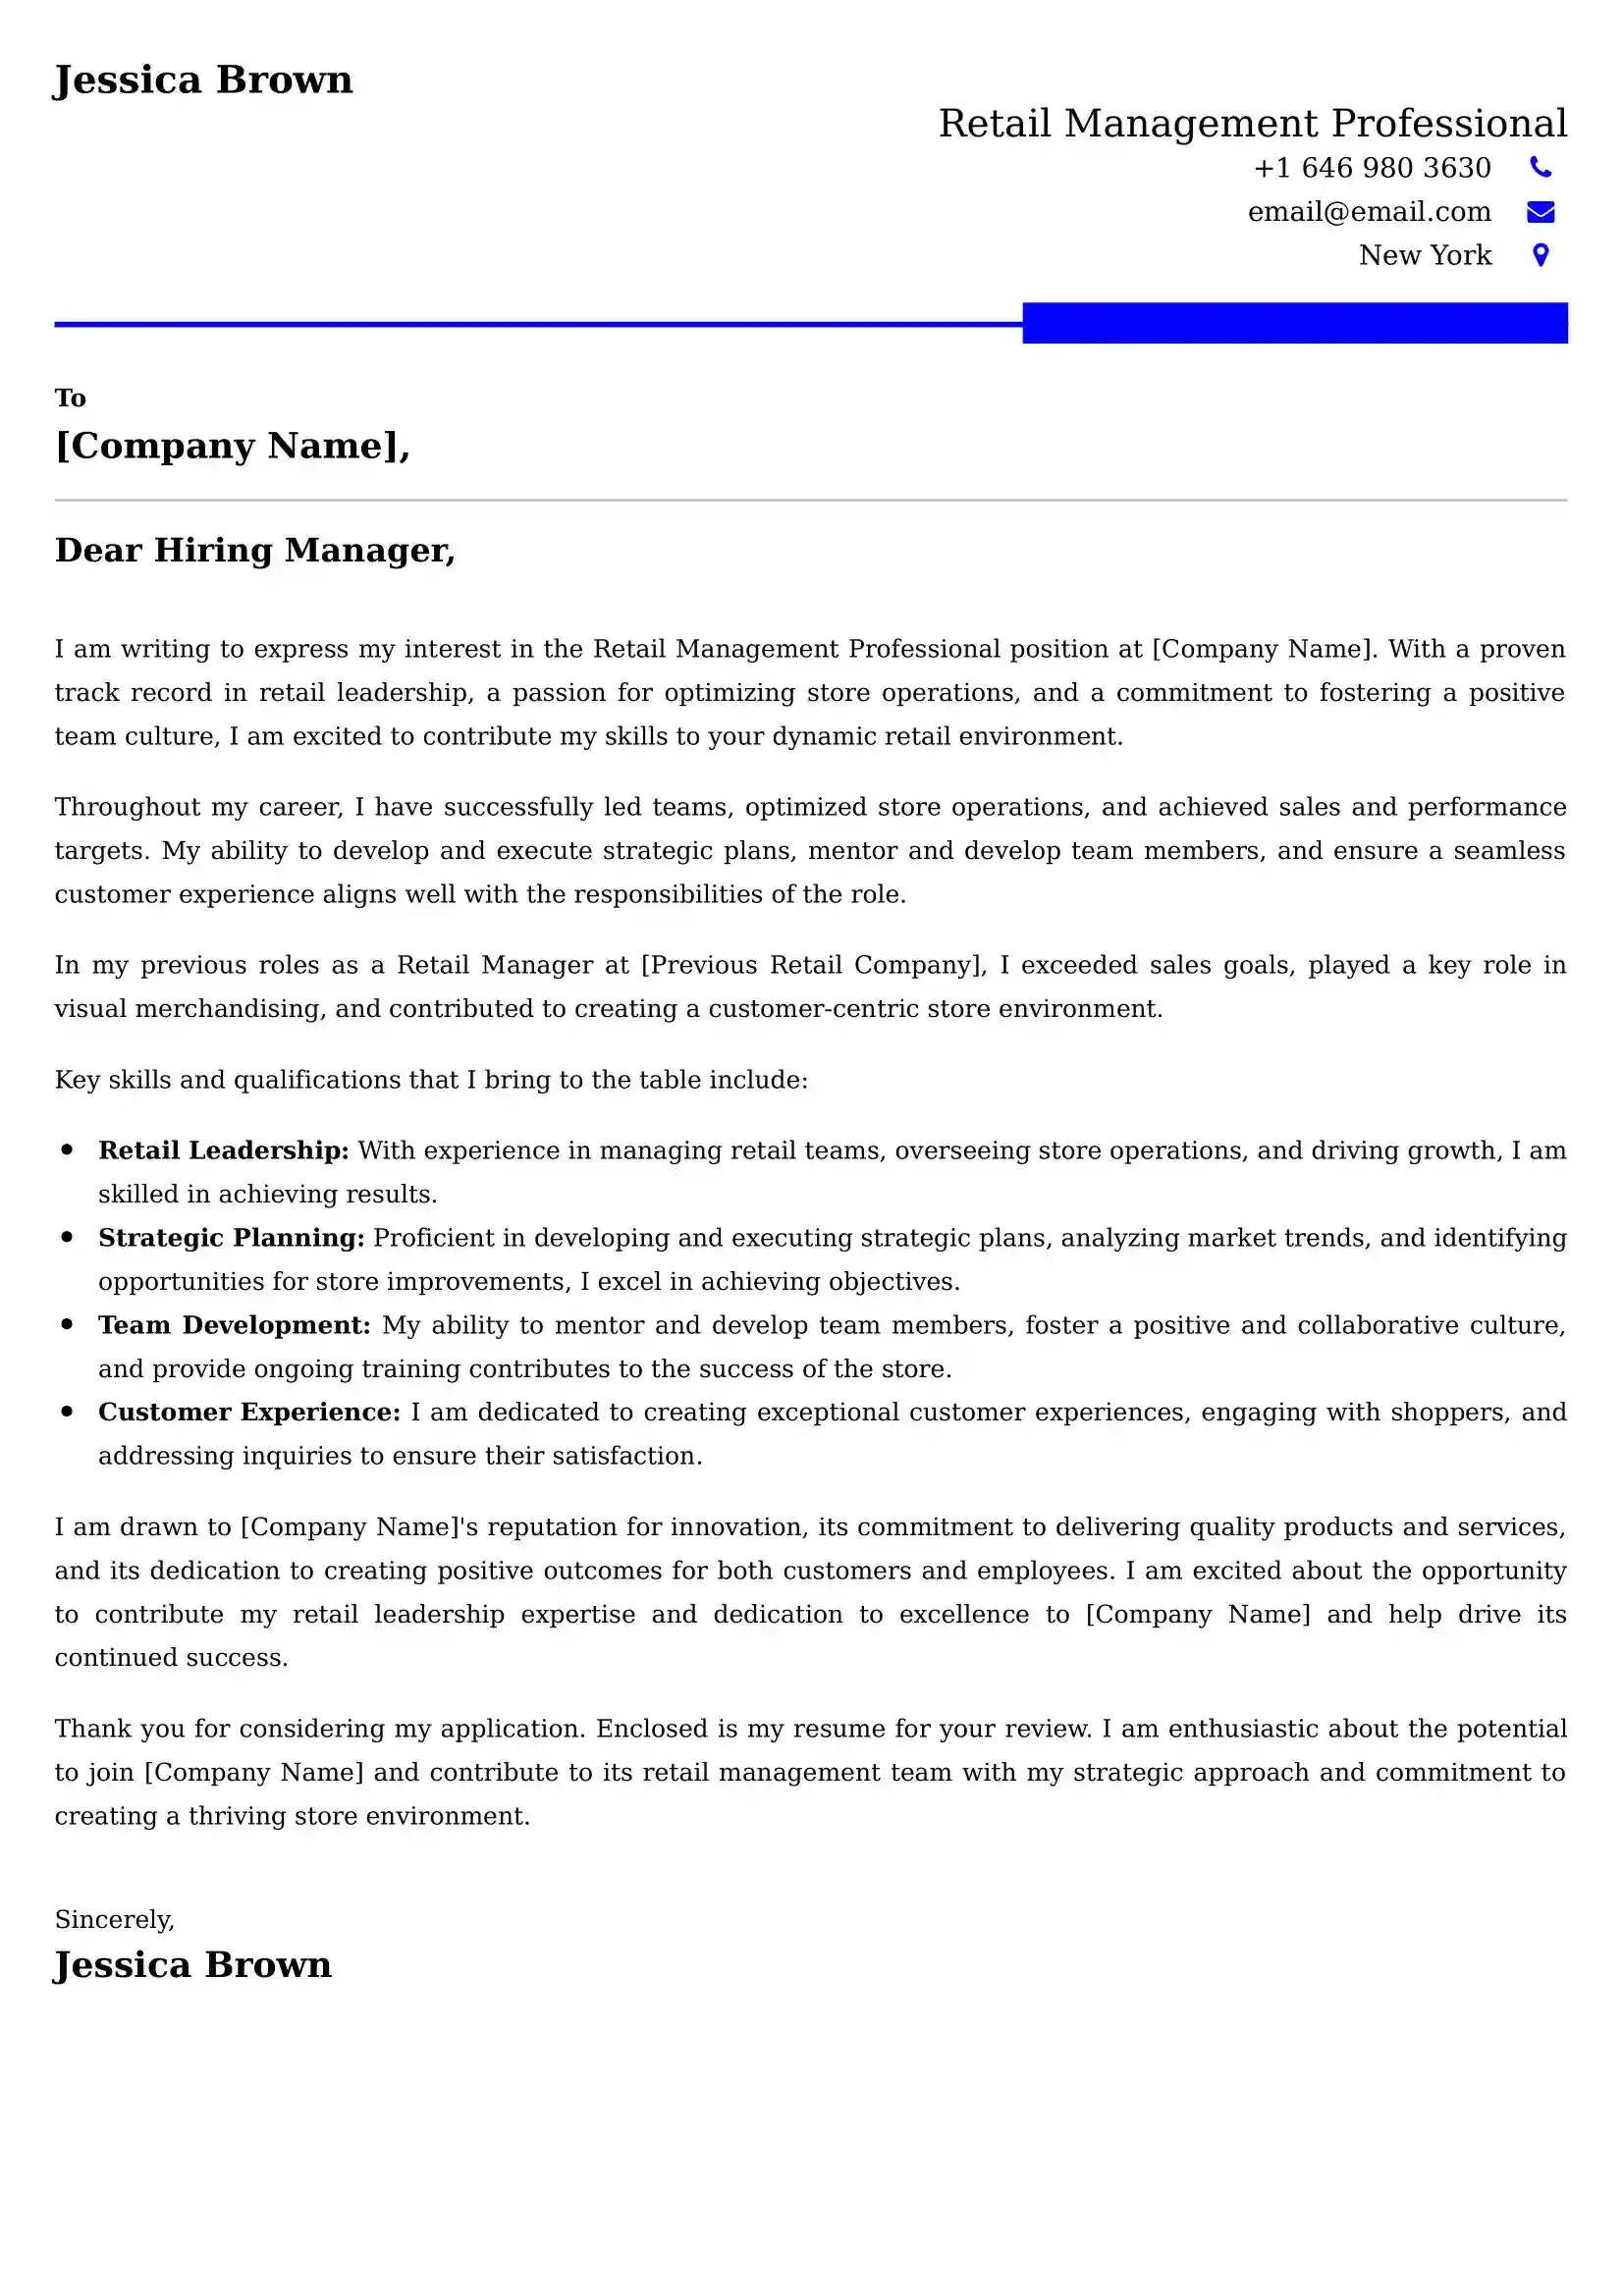 Retail Management Professional Cover Letter Examples UK - Tips and Guide